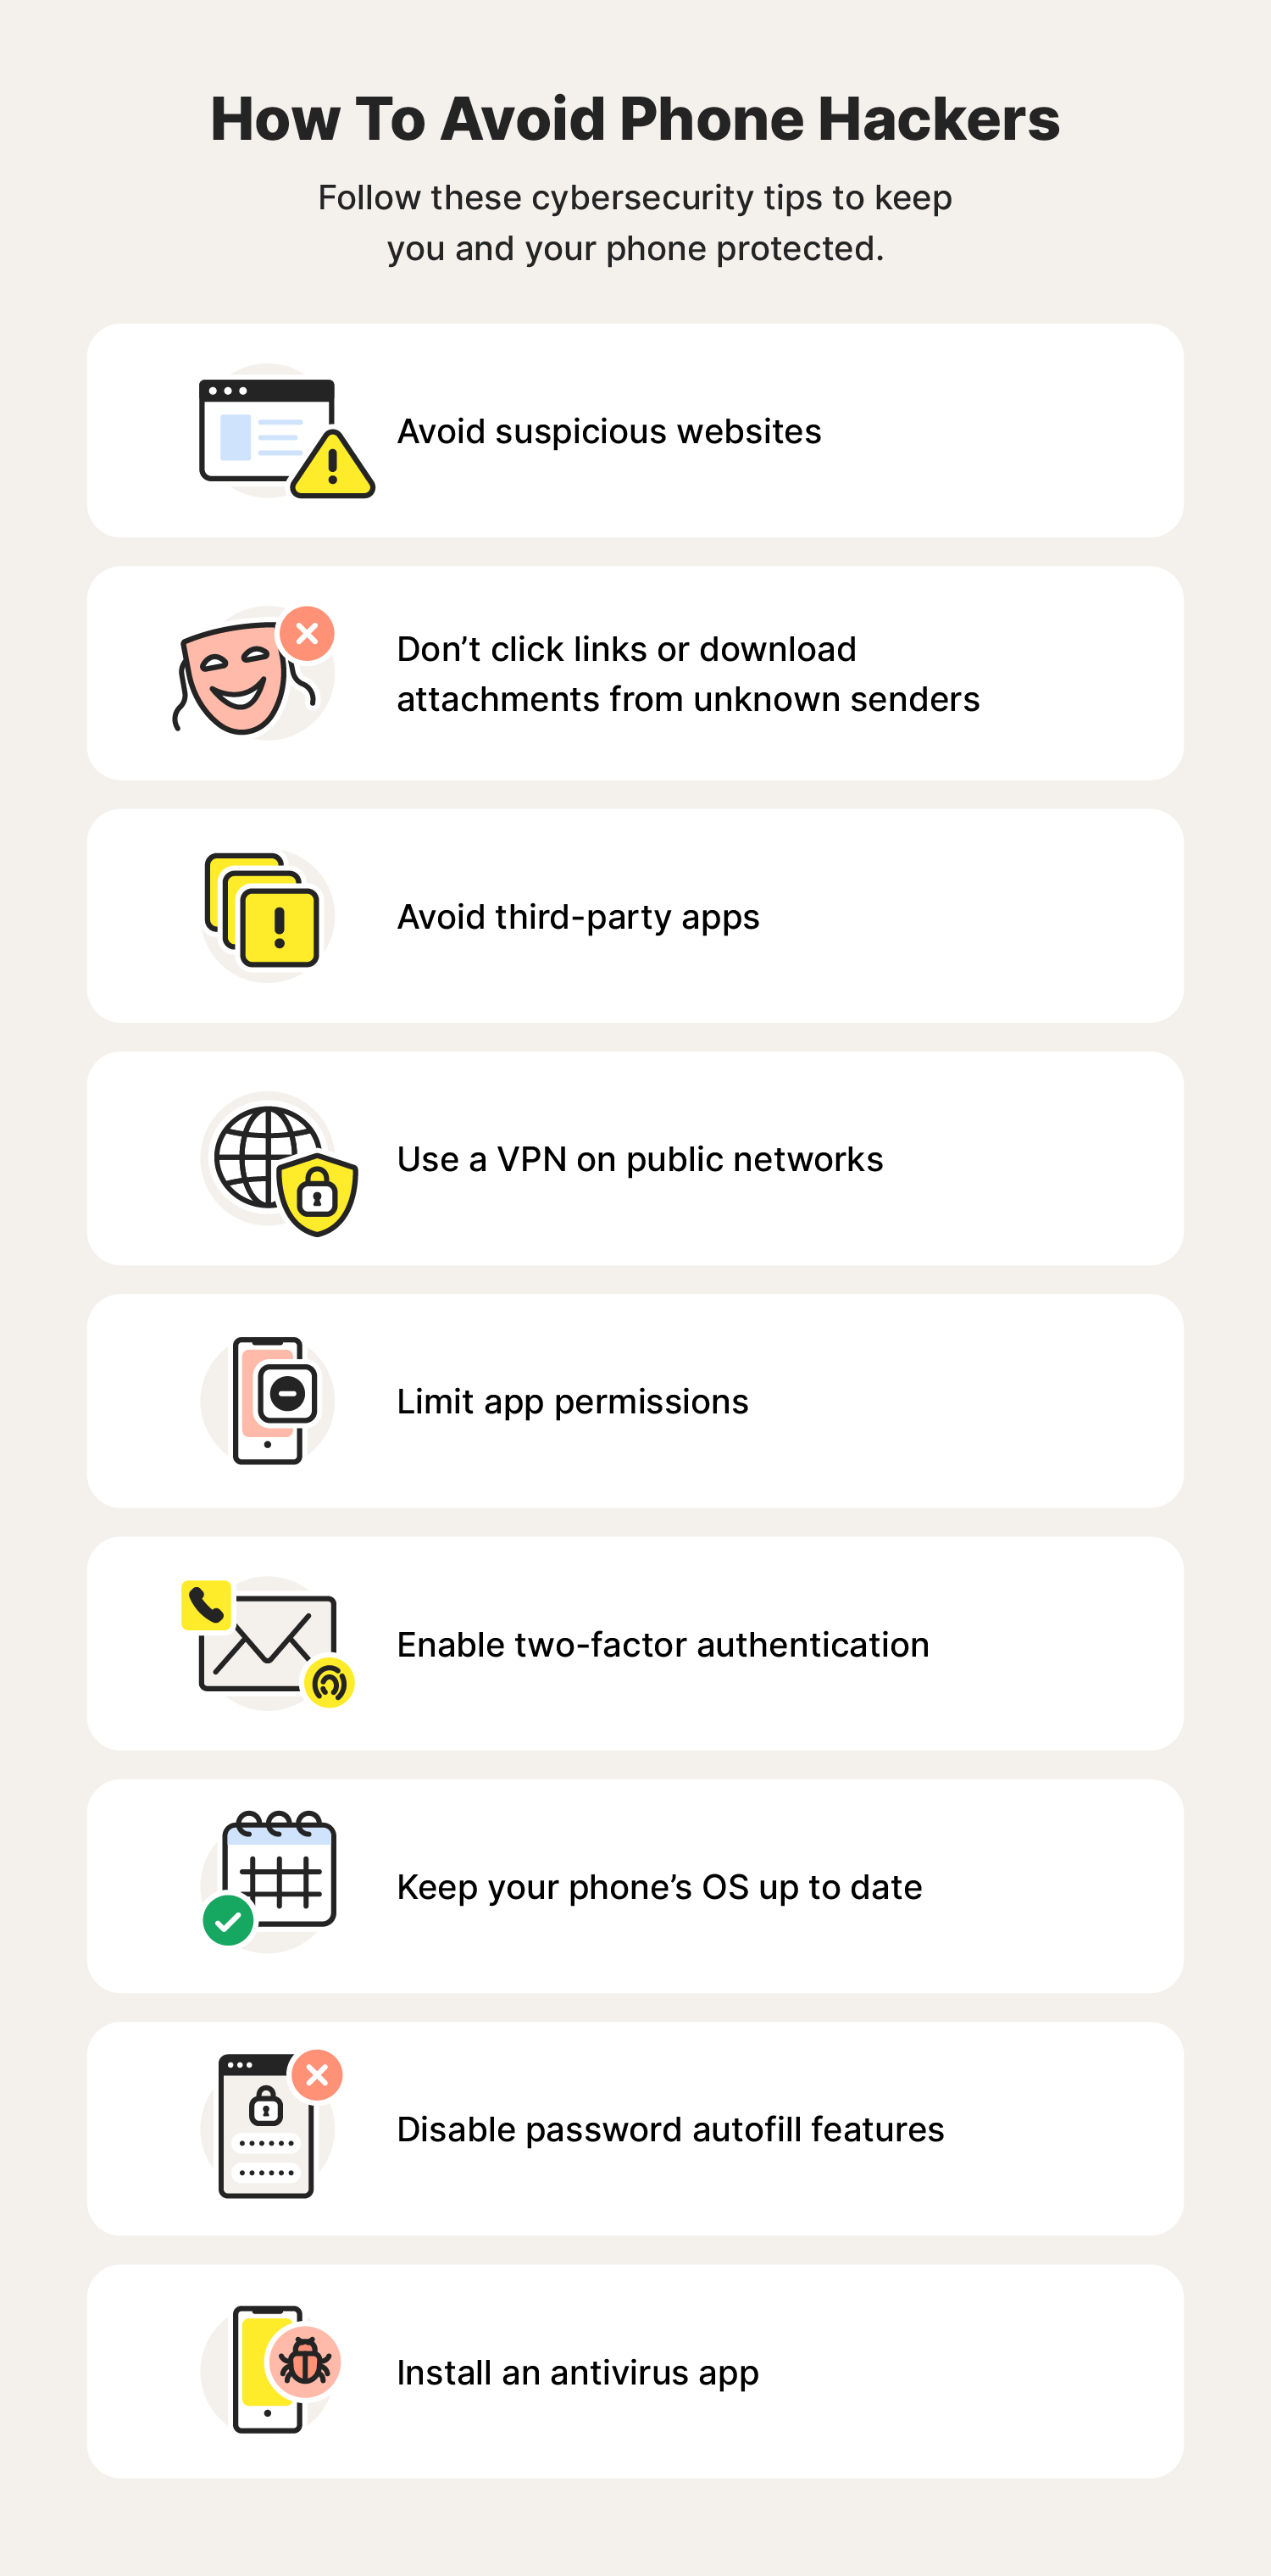 Nine illustrations accompany phone hacking protection tips you'd learn after searching "how to remove a hacker from my phone."